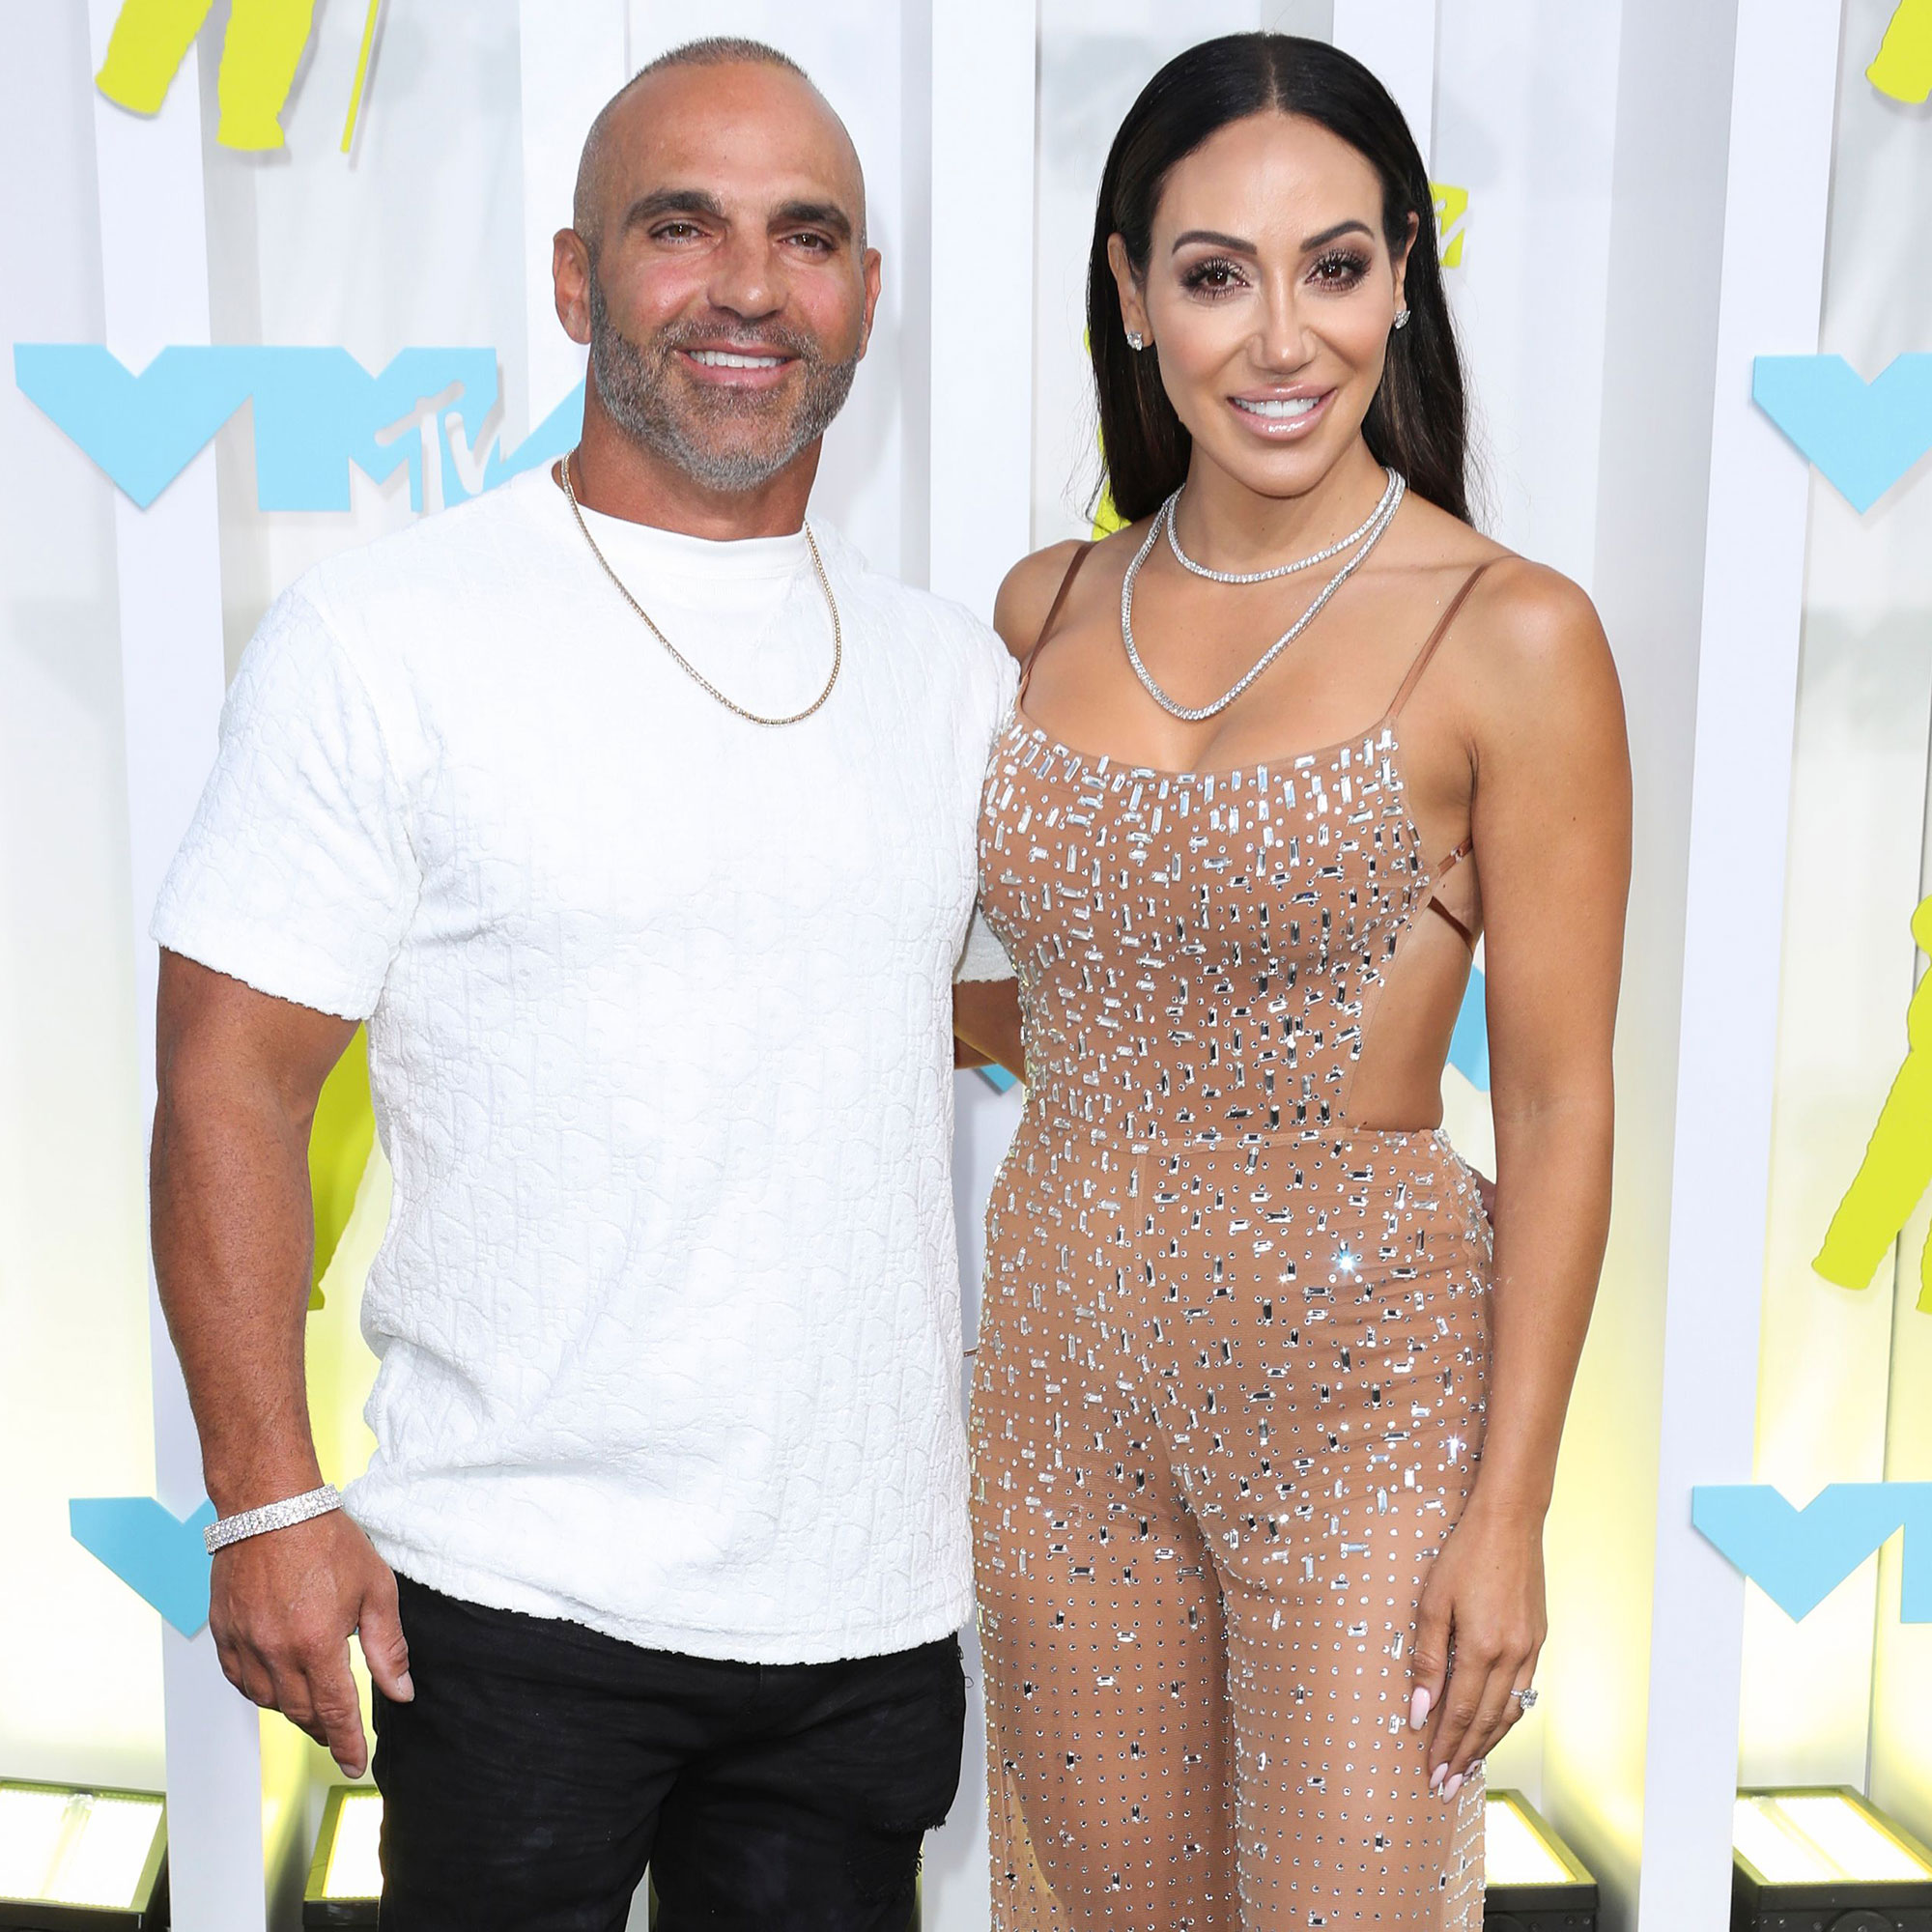 Melissa, Joe Gorga Cheating Rumors Have Tested Our Marriage